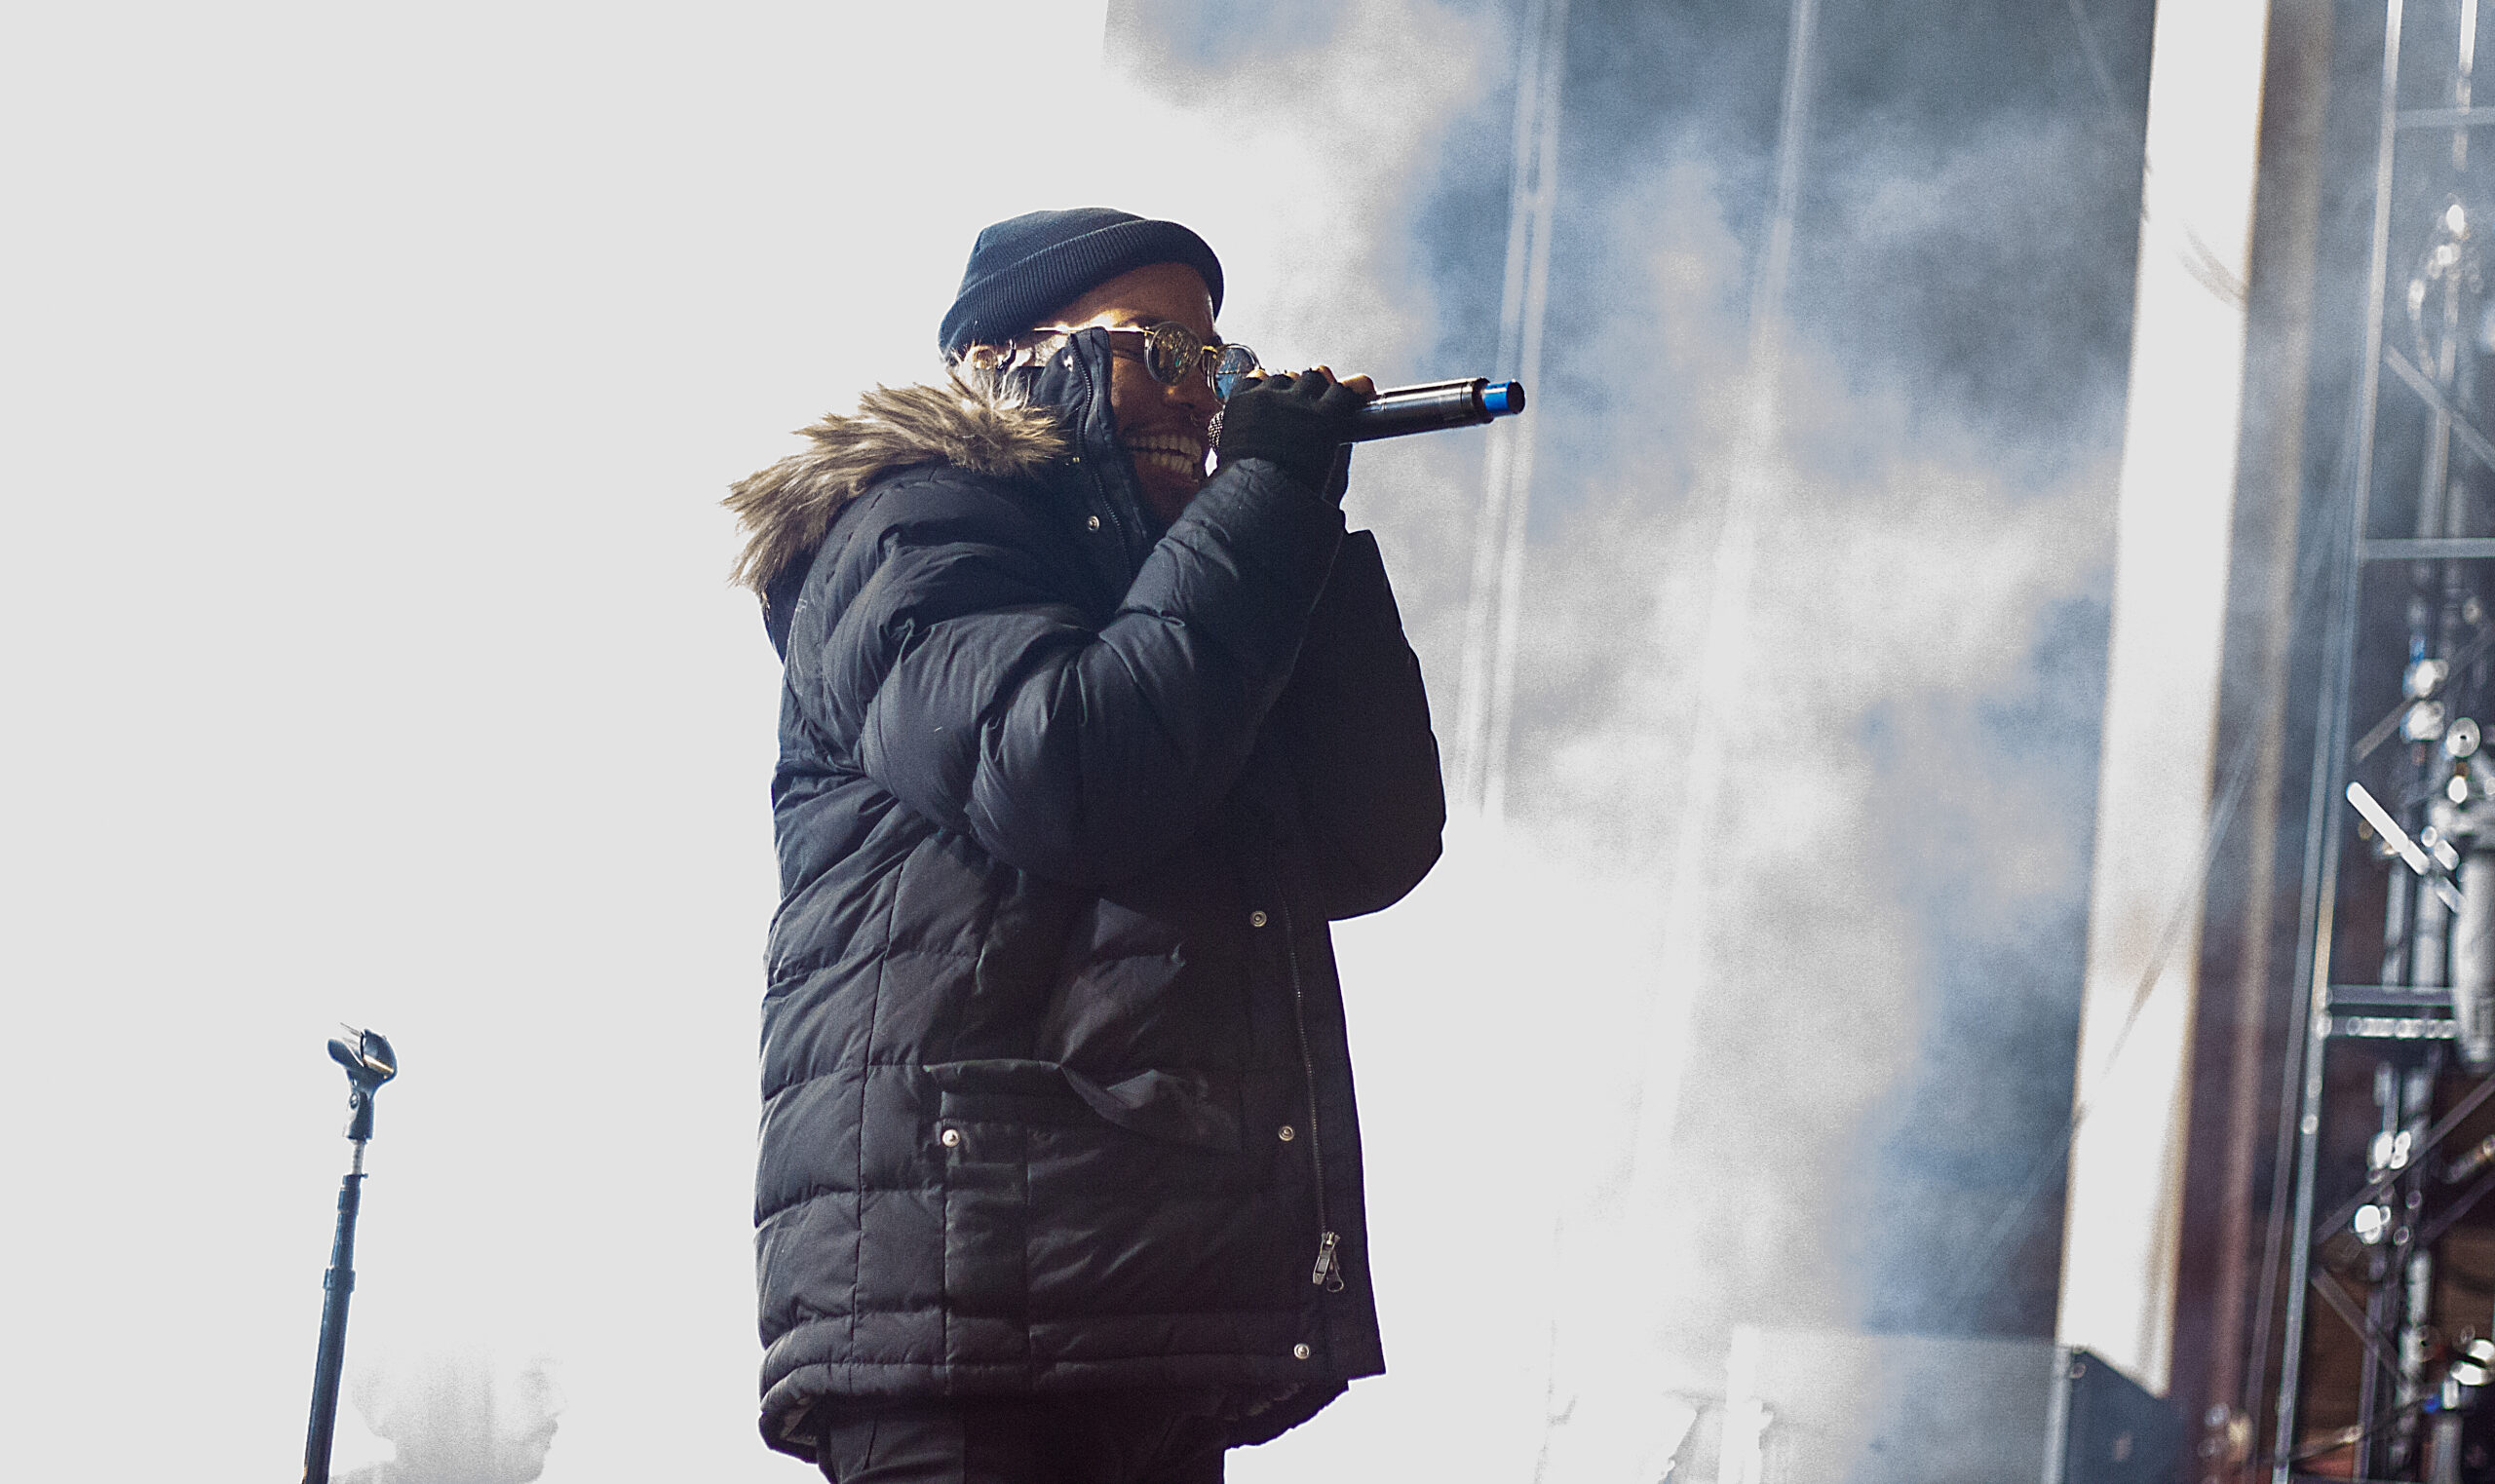 Anderson .Paak and the Free Nationals at Icelantic's Winter on the Rocks 2017. Photo taken on 01/27/17. Photo by: Matthew McGuire